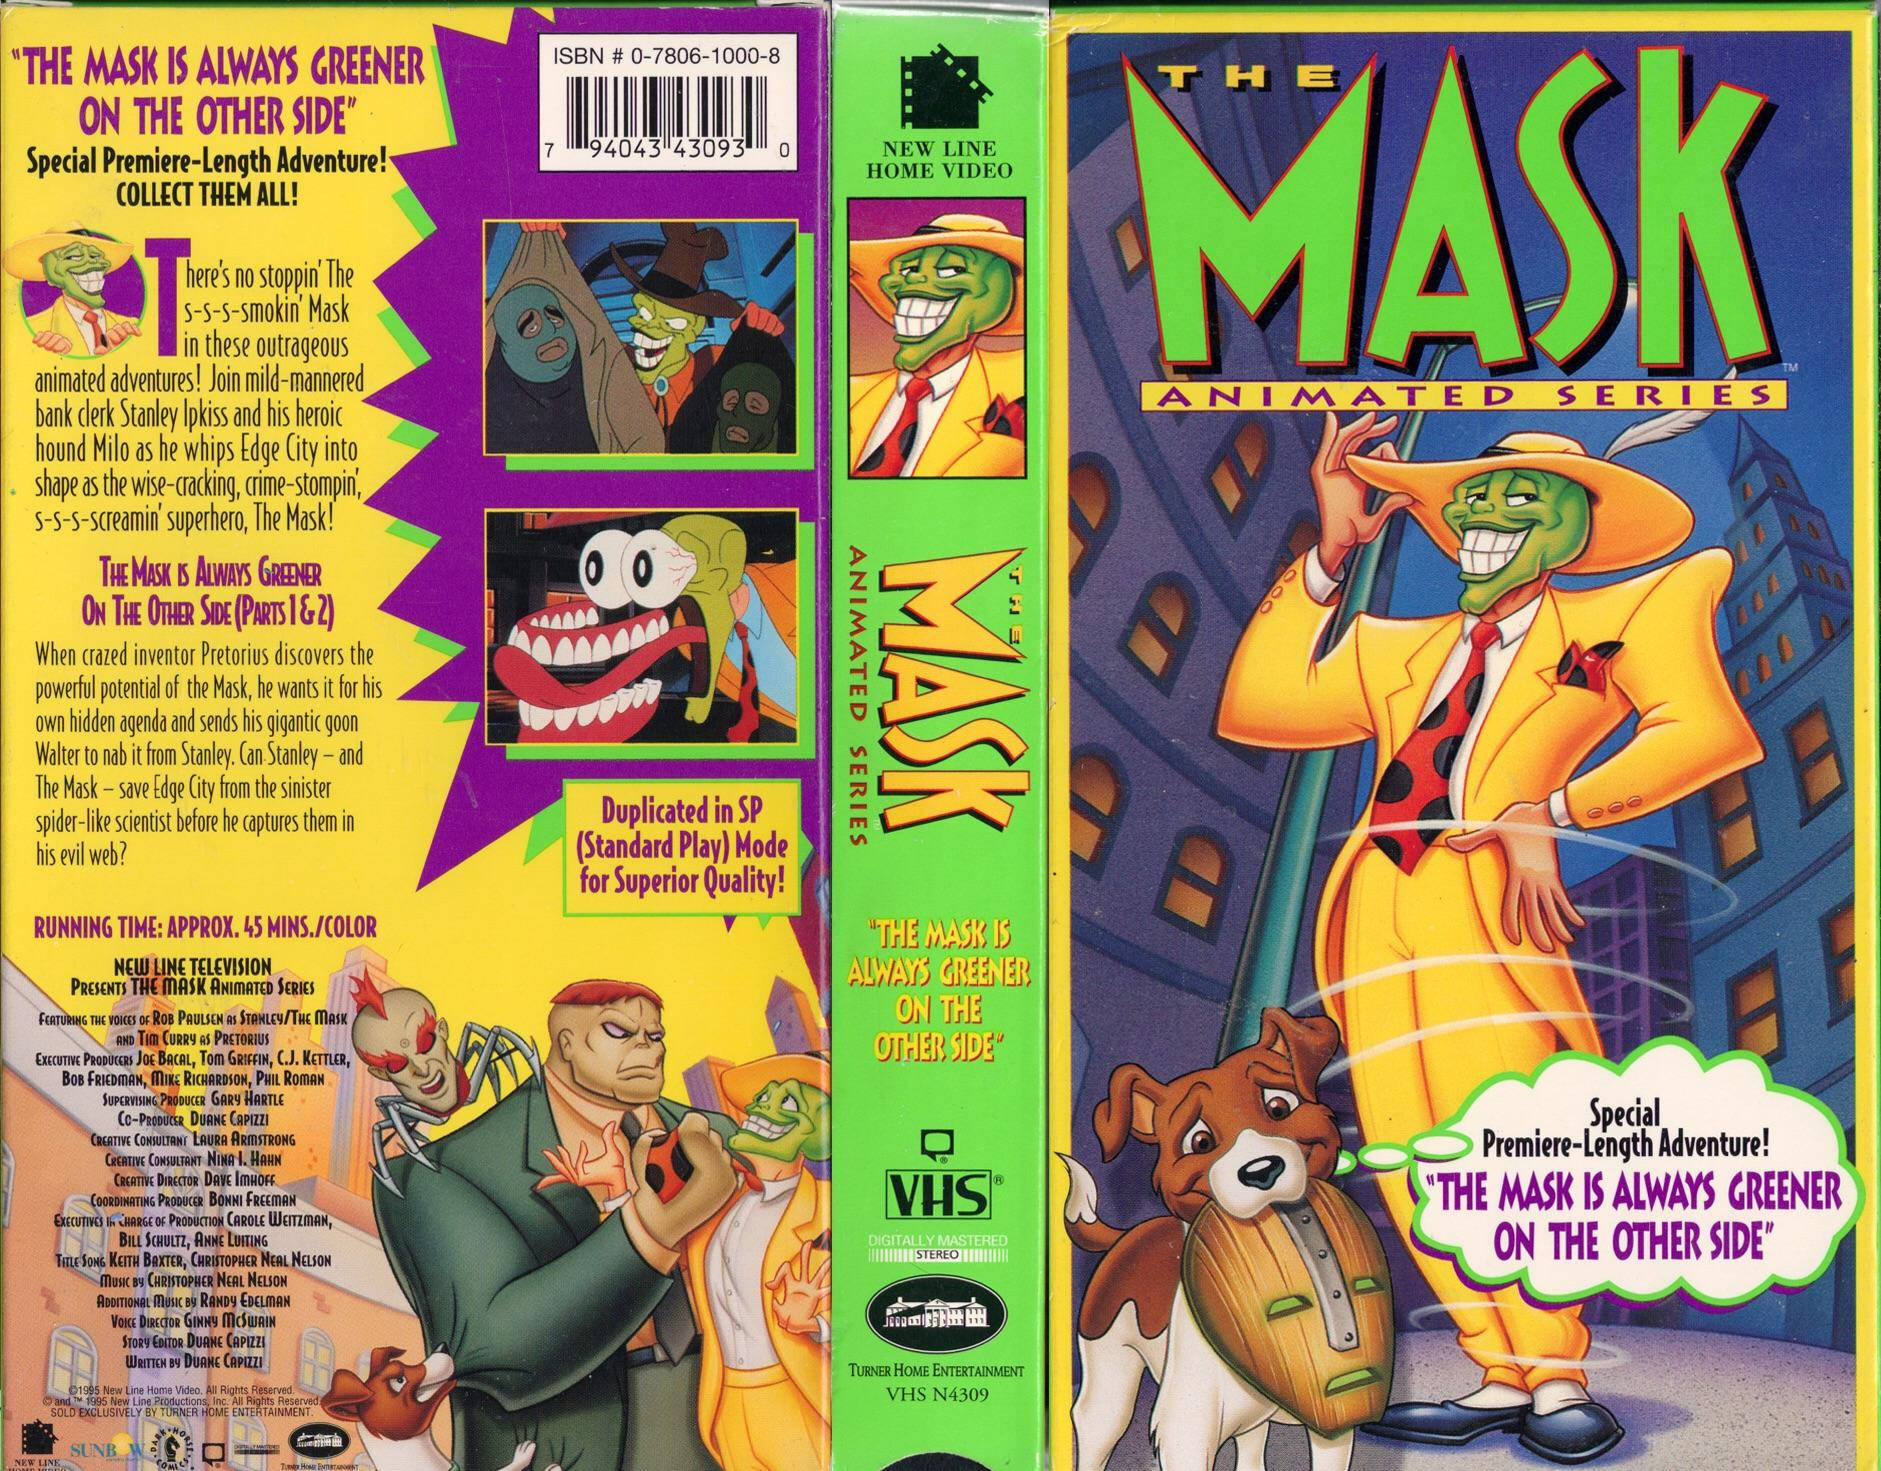 The Mask Home Video Cover Wallpaper